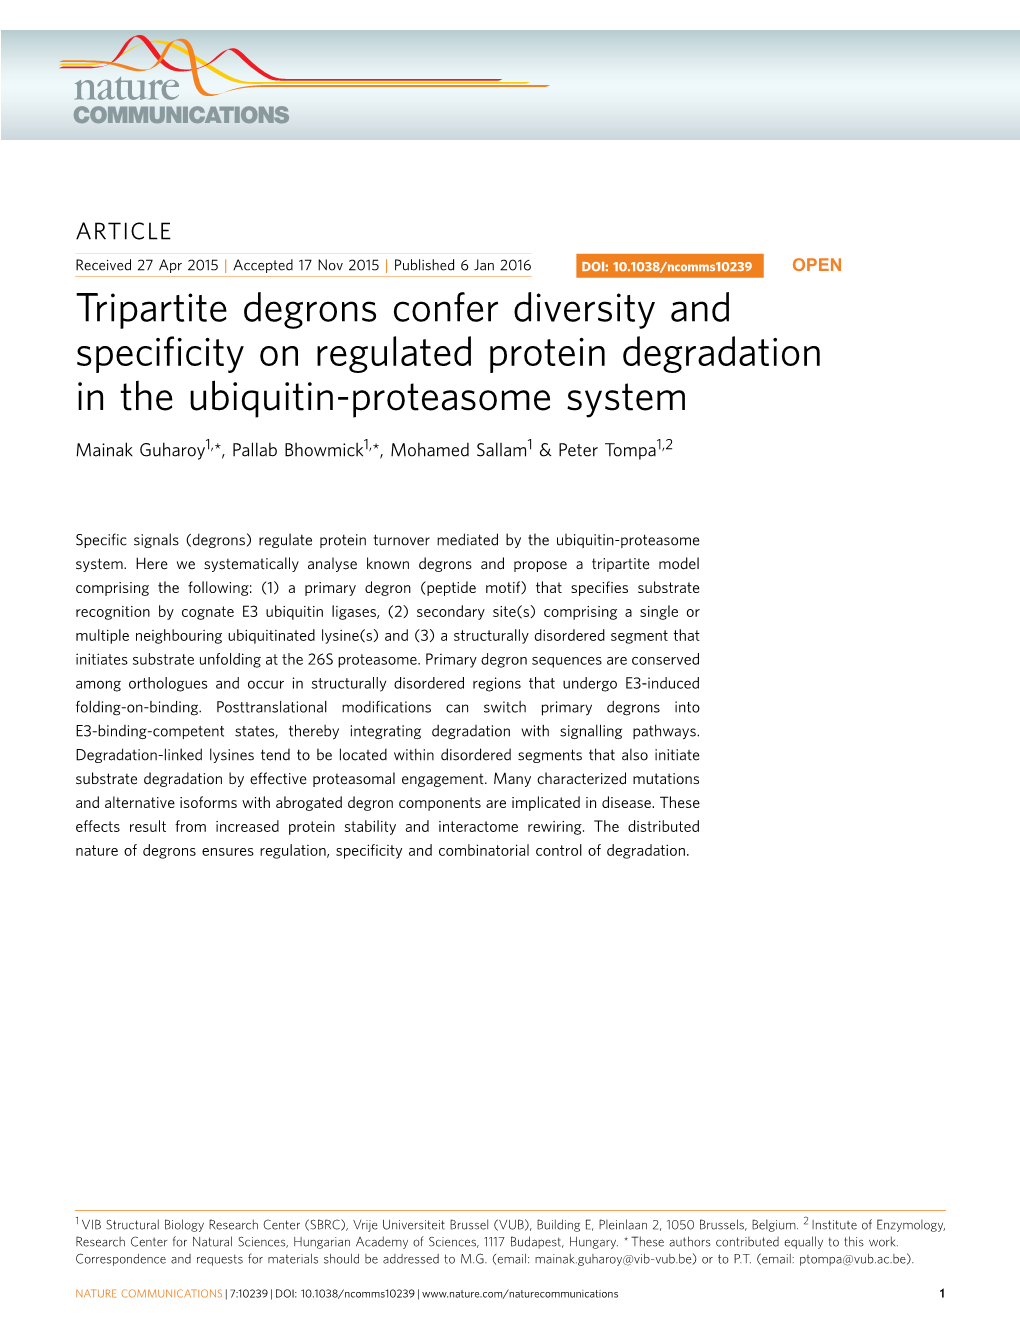 Tripartite Degrons Confer Diversity and Specificity on Regulated Protein